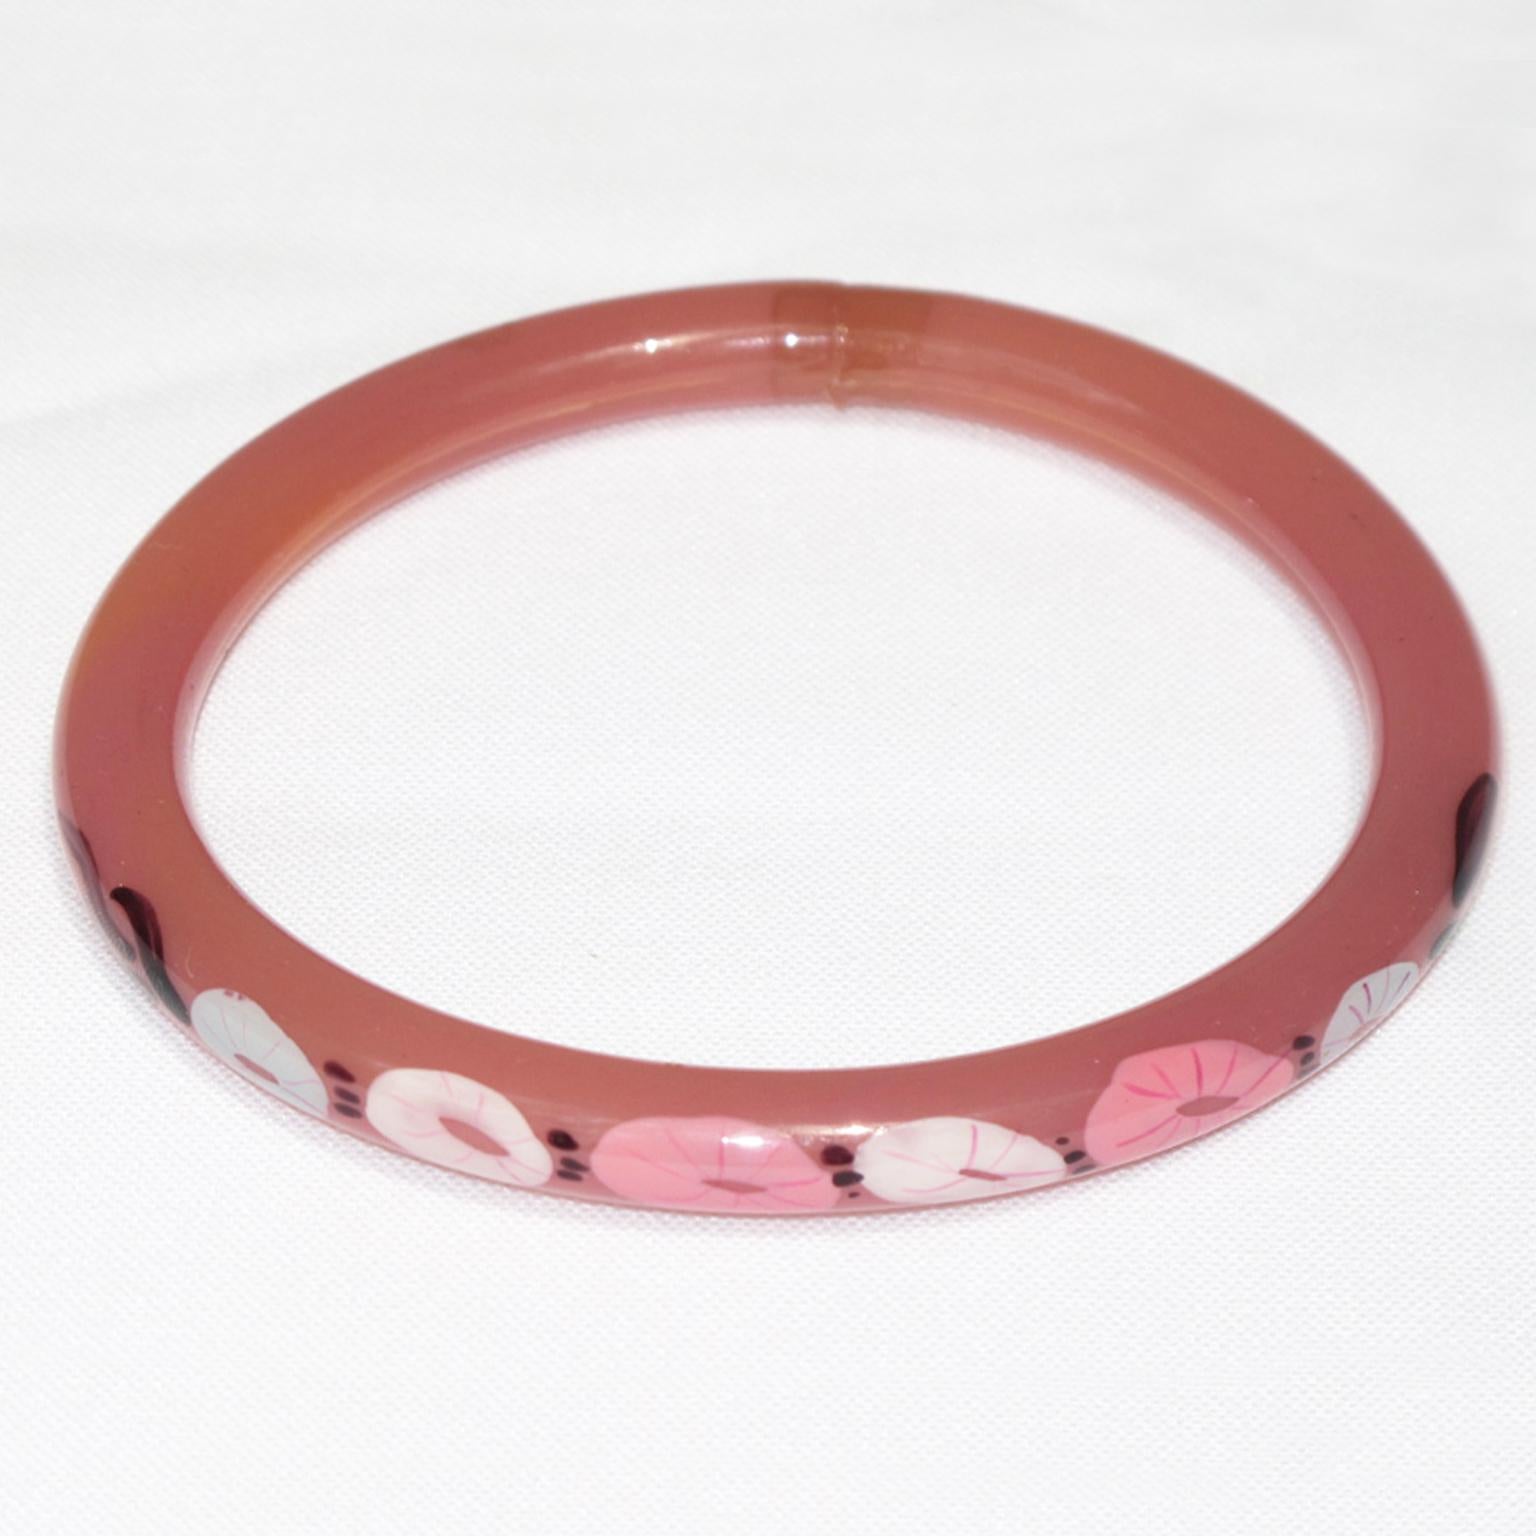 A sweet 1920s French Art Deco celluloid bracelet bangle. It features a light hollow tube shape with a floral design on one side of the bracelet. 
The hollow bracelet technique is an ancient technique applied to jewelry at the turn of the 20th